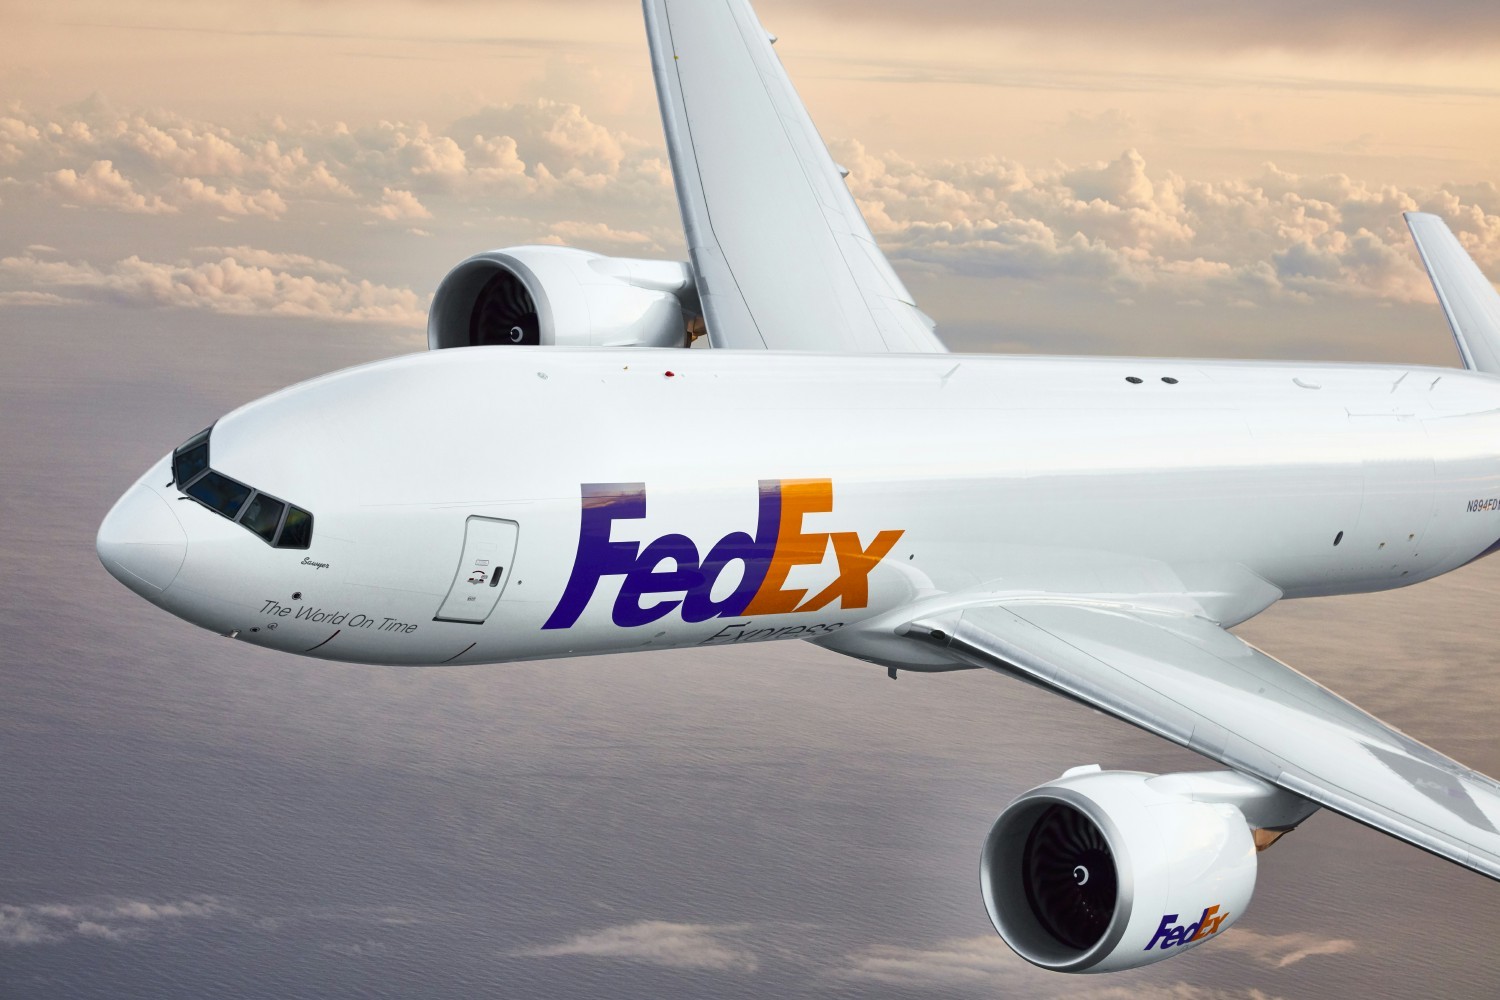 FedEx provides customers and businesses worldwide with a broad portfolio of transport, e-commerce and business services.